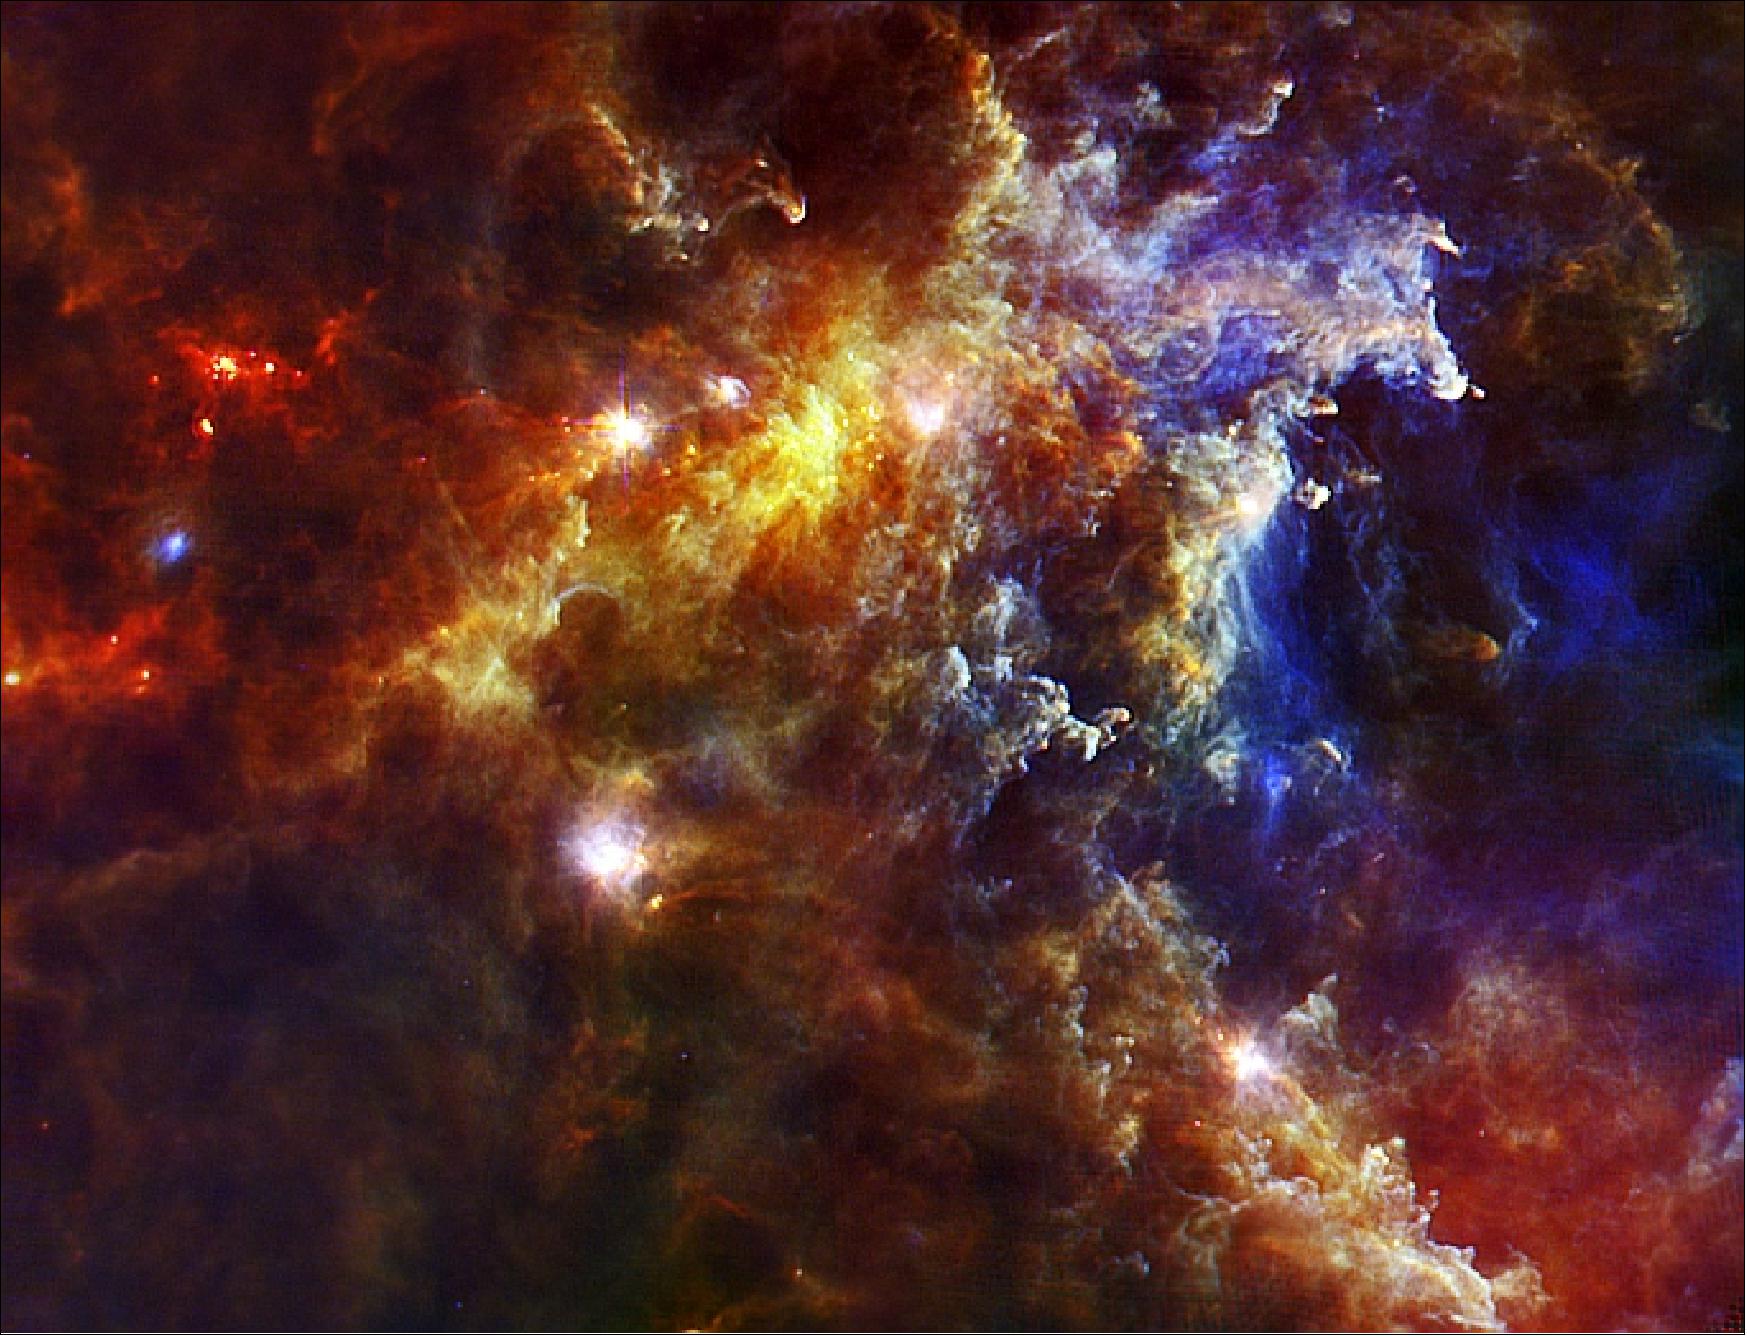 Figure 81: Infrared image of the Rosette molecular cloud 5000 light years from Earth as seen by HSO (image credit: ESA/PACS & SPIRE Consortium/HOBYS Key Programme Consortia) 124)